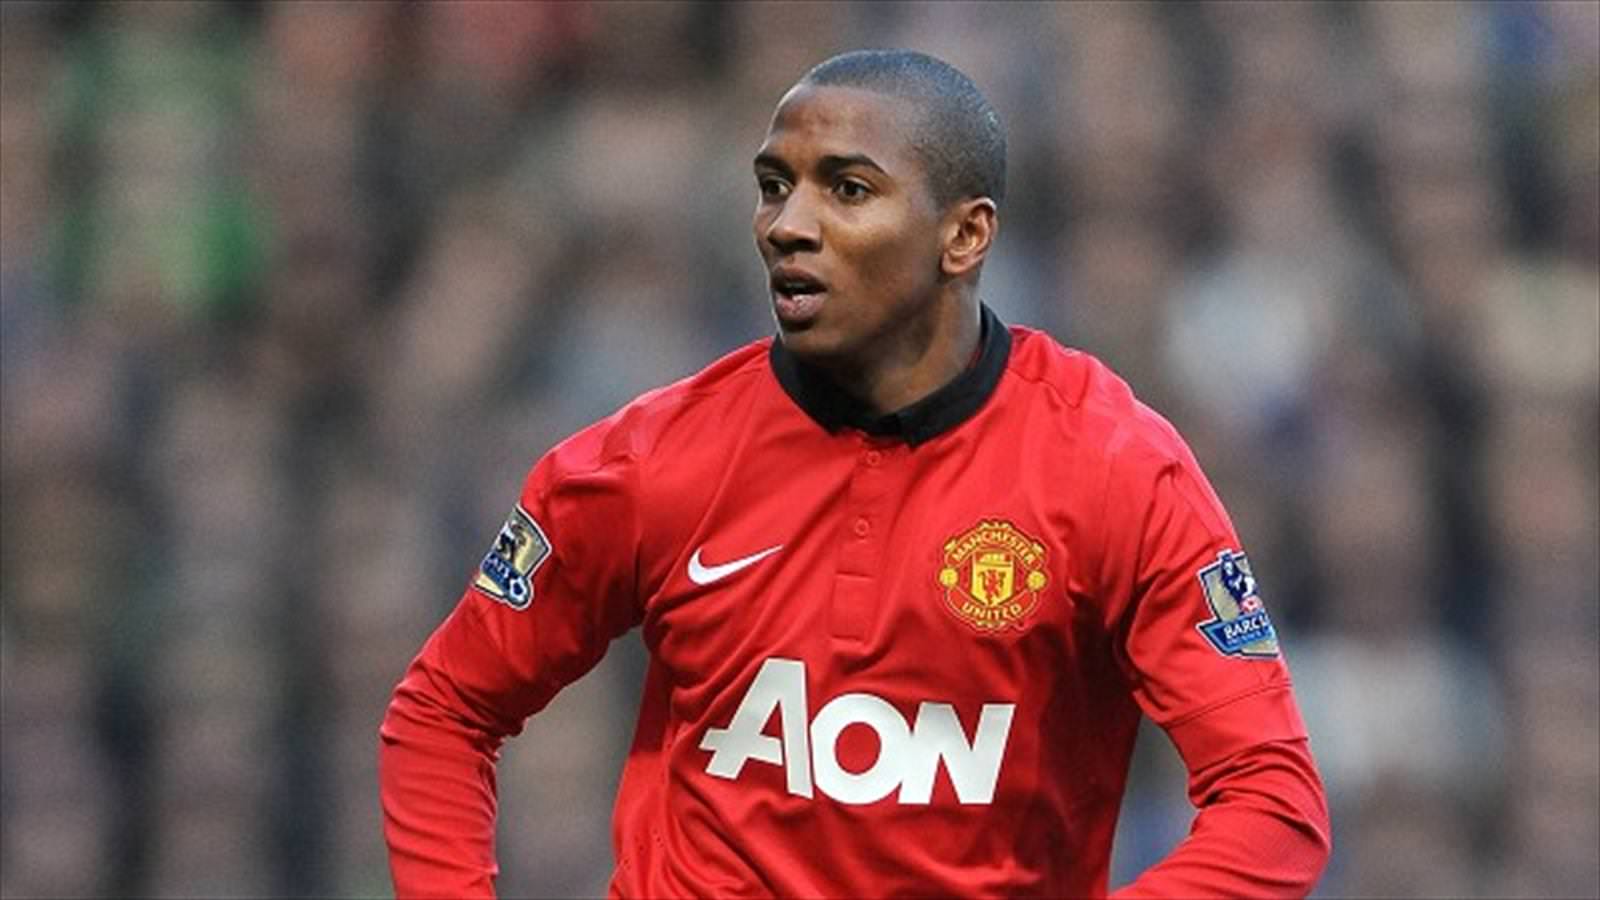 ashley young 2014 picture. Desktop Background for Free HD